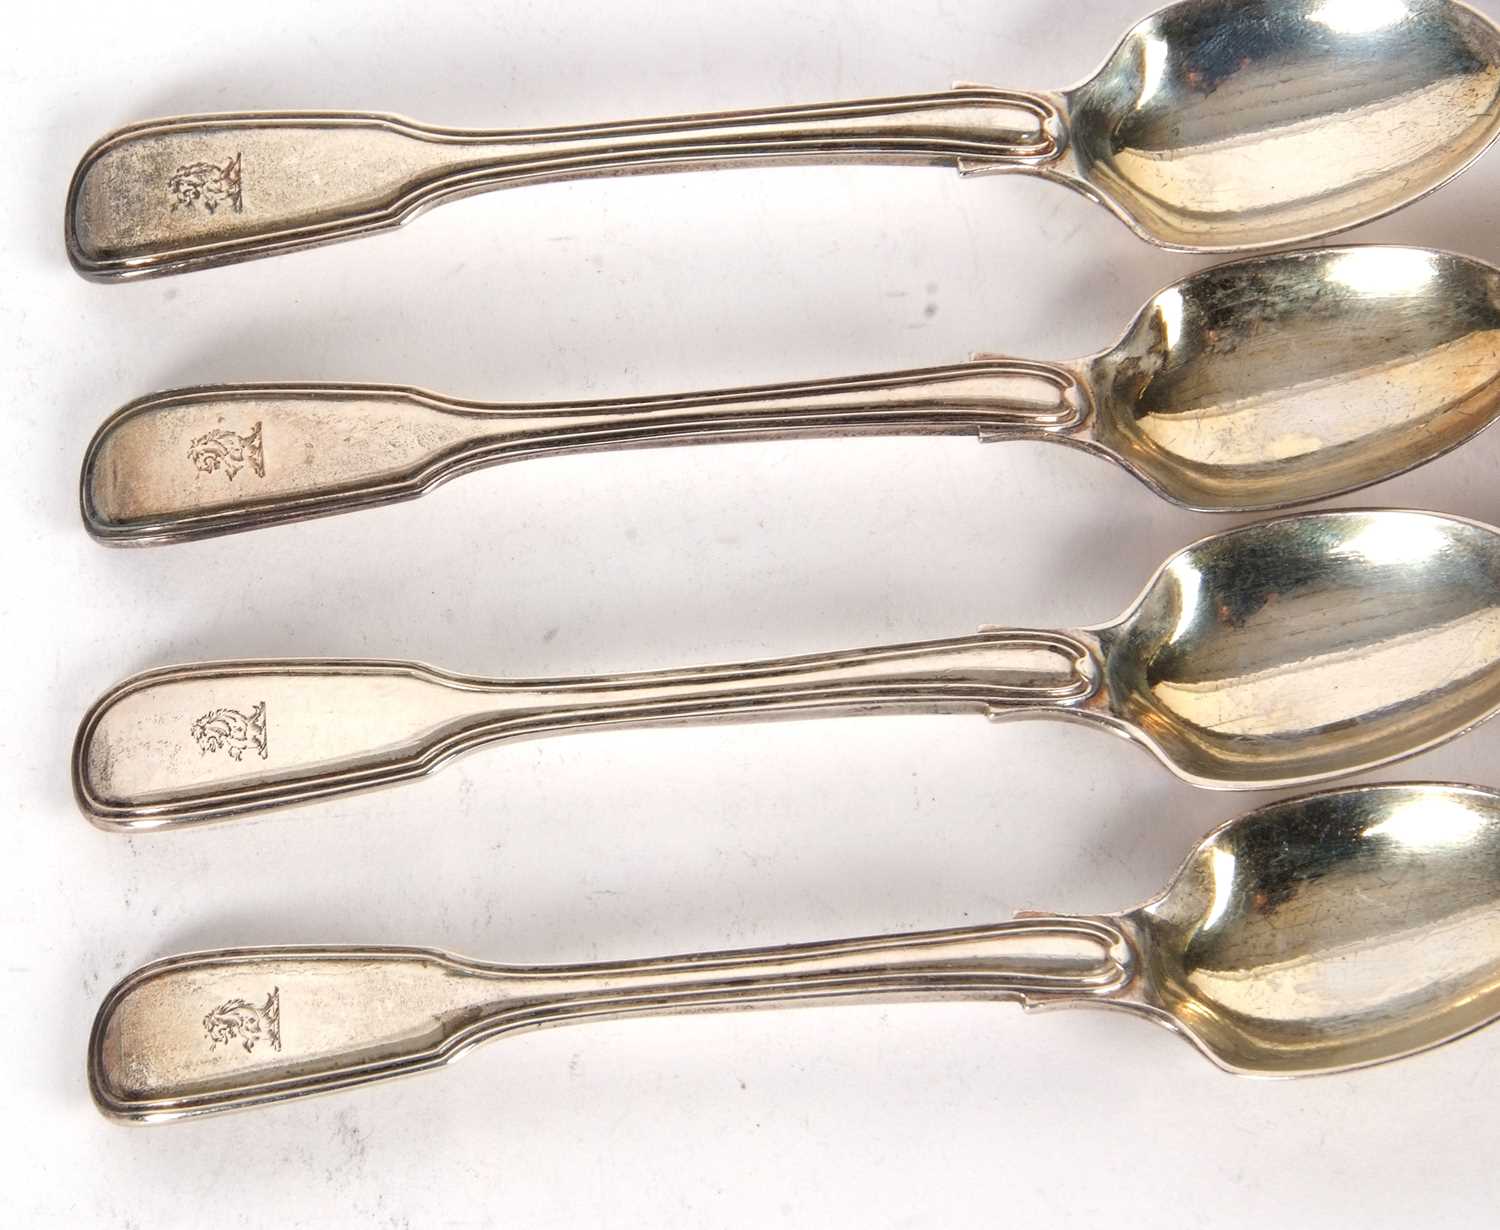 Six William IV silver teaspoons, fiddle and thread pattern, engraved with a demi-lion, London 1831 - Image 2 of 4